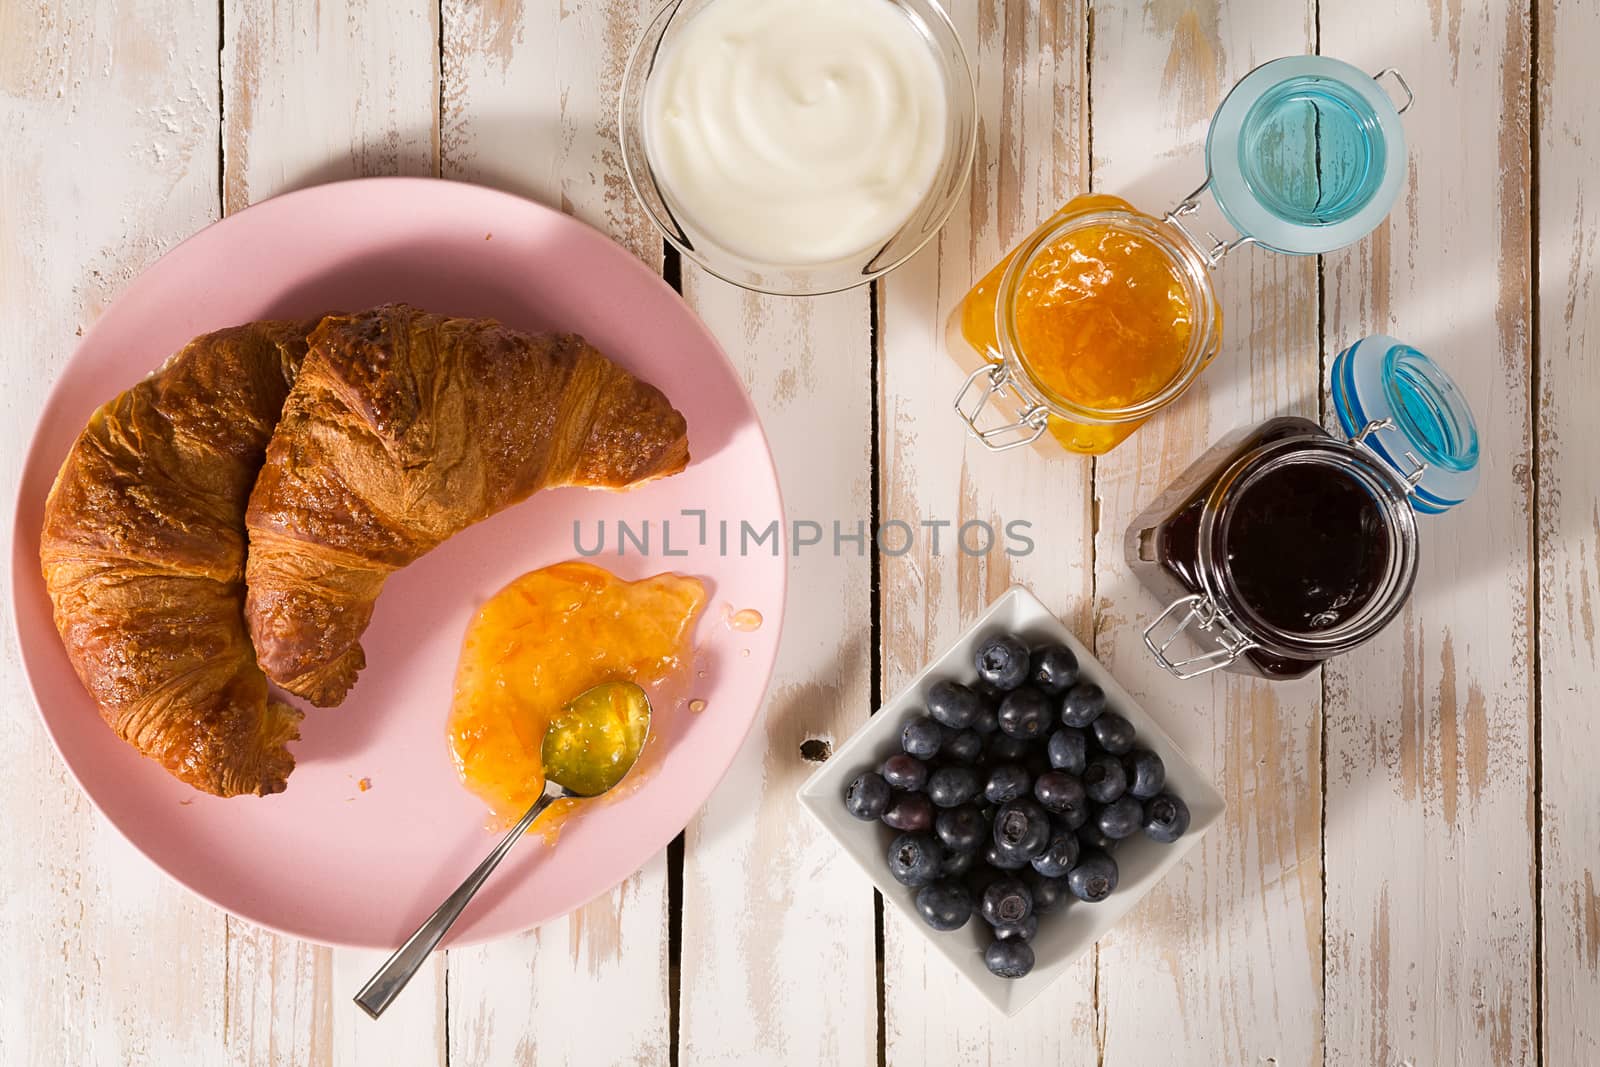 Breakfast with croissant, blueberries, yogurt, orange and blueberry jam over a wooden table seen from above